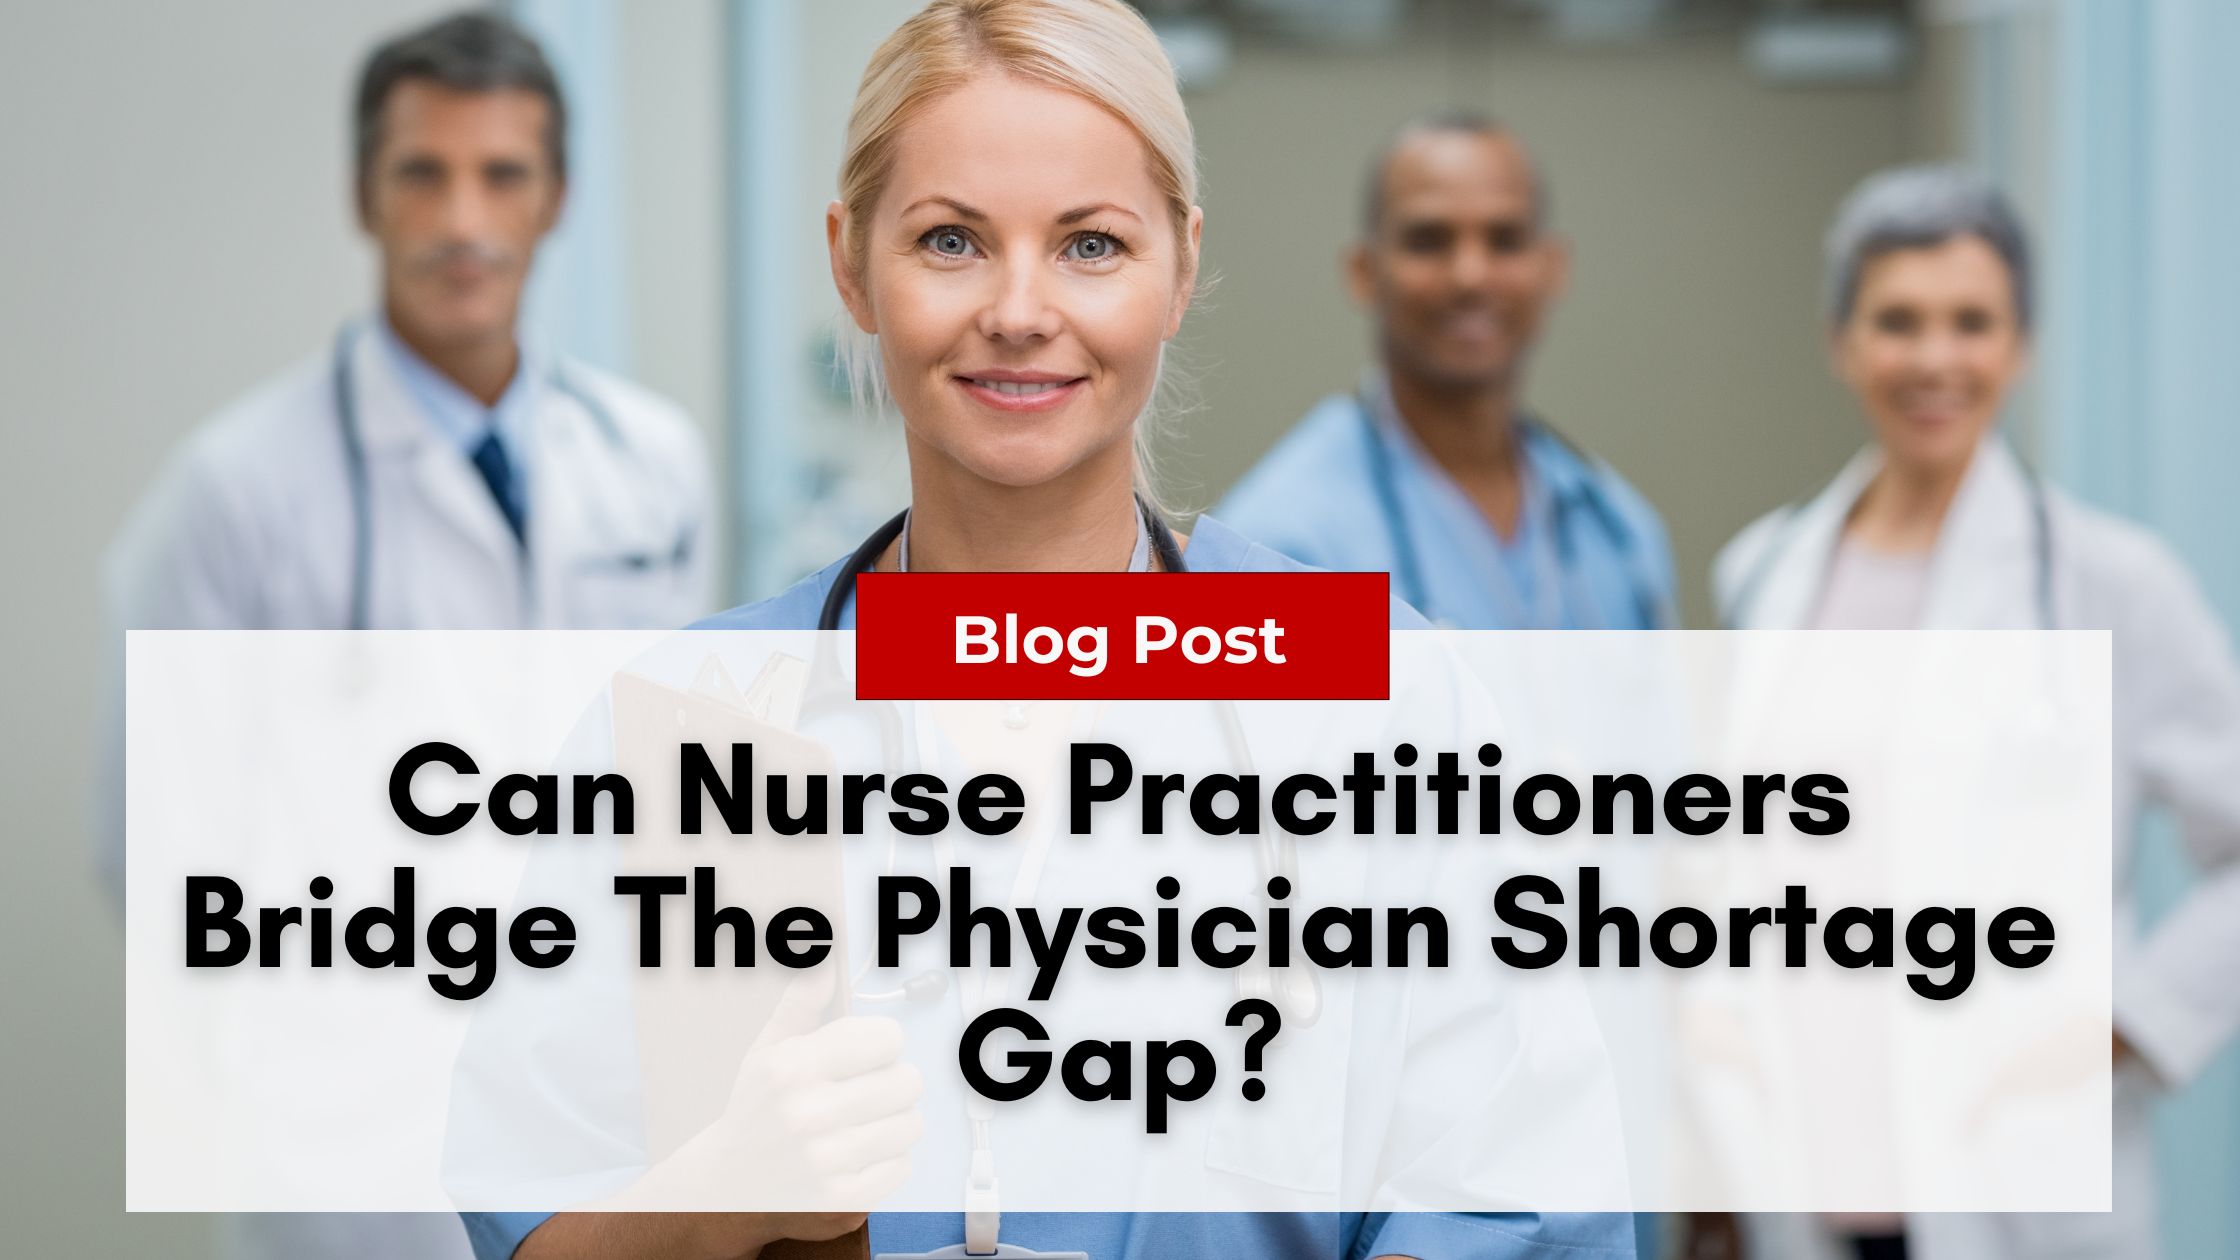 A group of healthcare professionals, with a female nurse practitioner in focus, stand together in a medical setting. The text overlay reads: "Blog Post: Can Nurse Practitioners Bridge The Physician Shortage Gap? Explore the impact of nurse practitioner burnout.